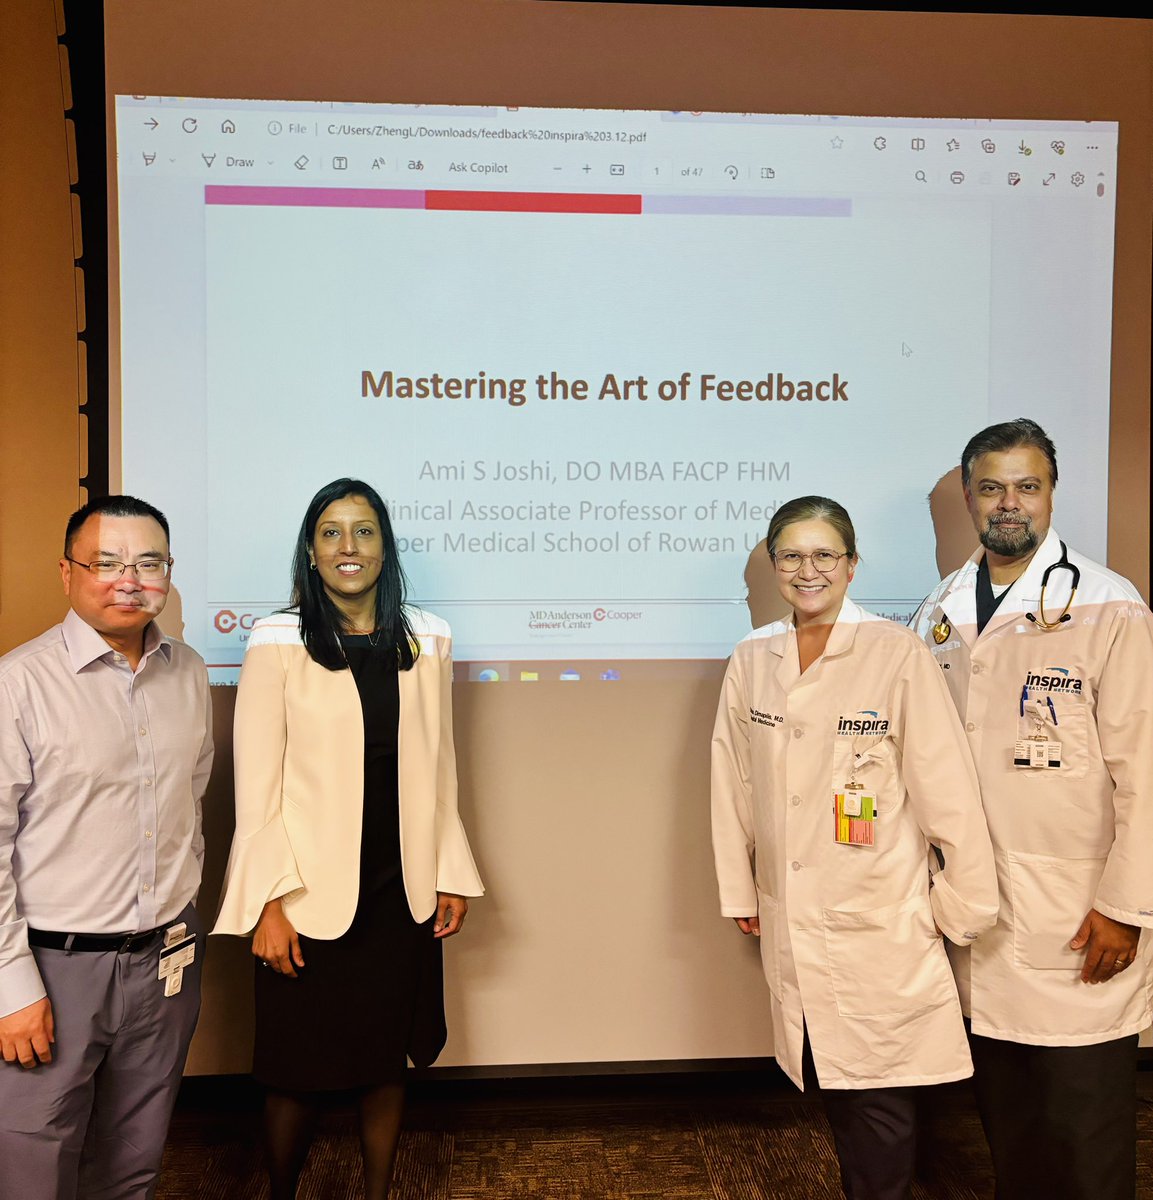 Thanks to Drs. Zheng and Borrra for the opportunity to share tips on giving effective feedback. Great reconnecting with old colleagues @Mannymungekar @christinaoratedimapilis @Inspira__Health @CooperHealthNJ @CooperGME @CooperHospMed #medicaleducation #coaching #gme